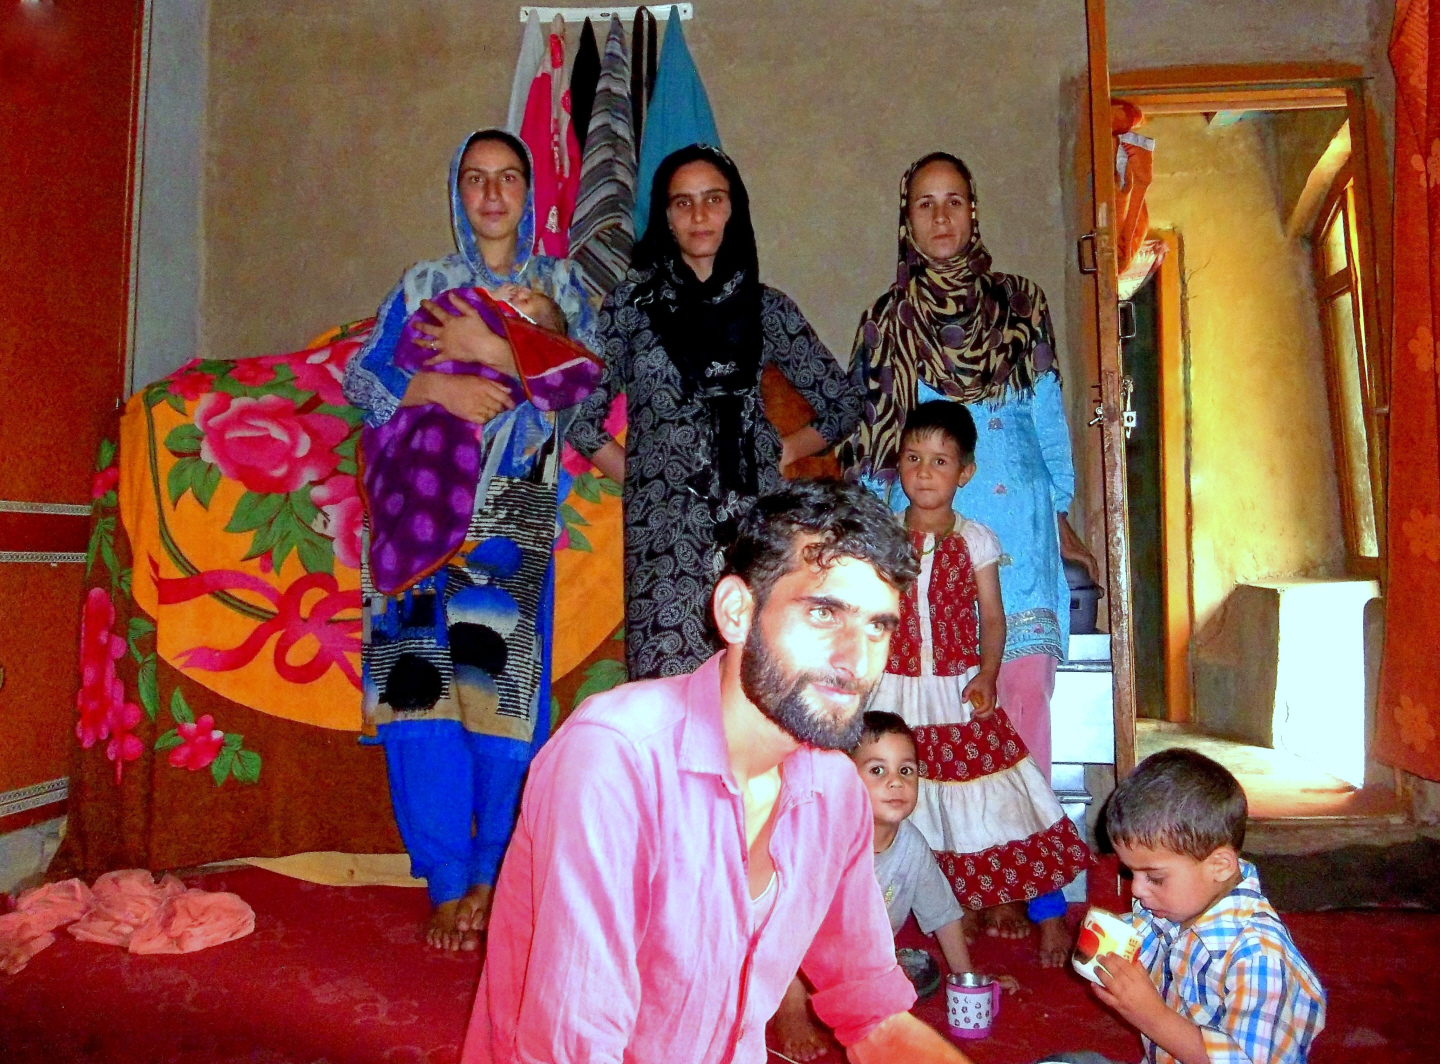 Hospitable Villagers invited Ajata & Virginia to Tea - They are the Family of Adil, the Cook at their Hotel -  Sumlar, Kashmir